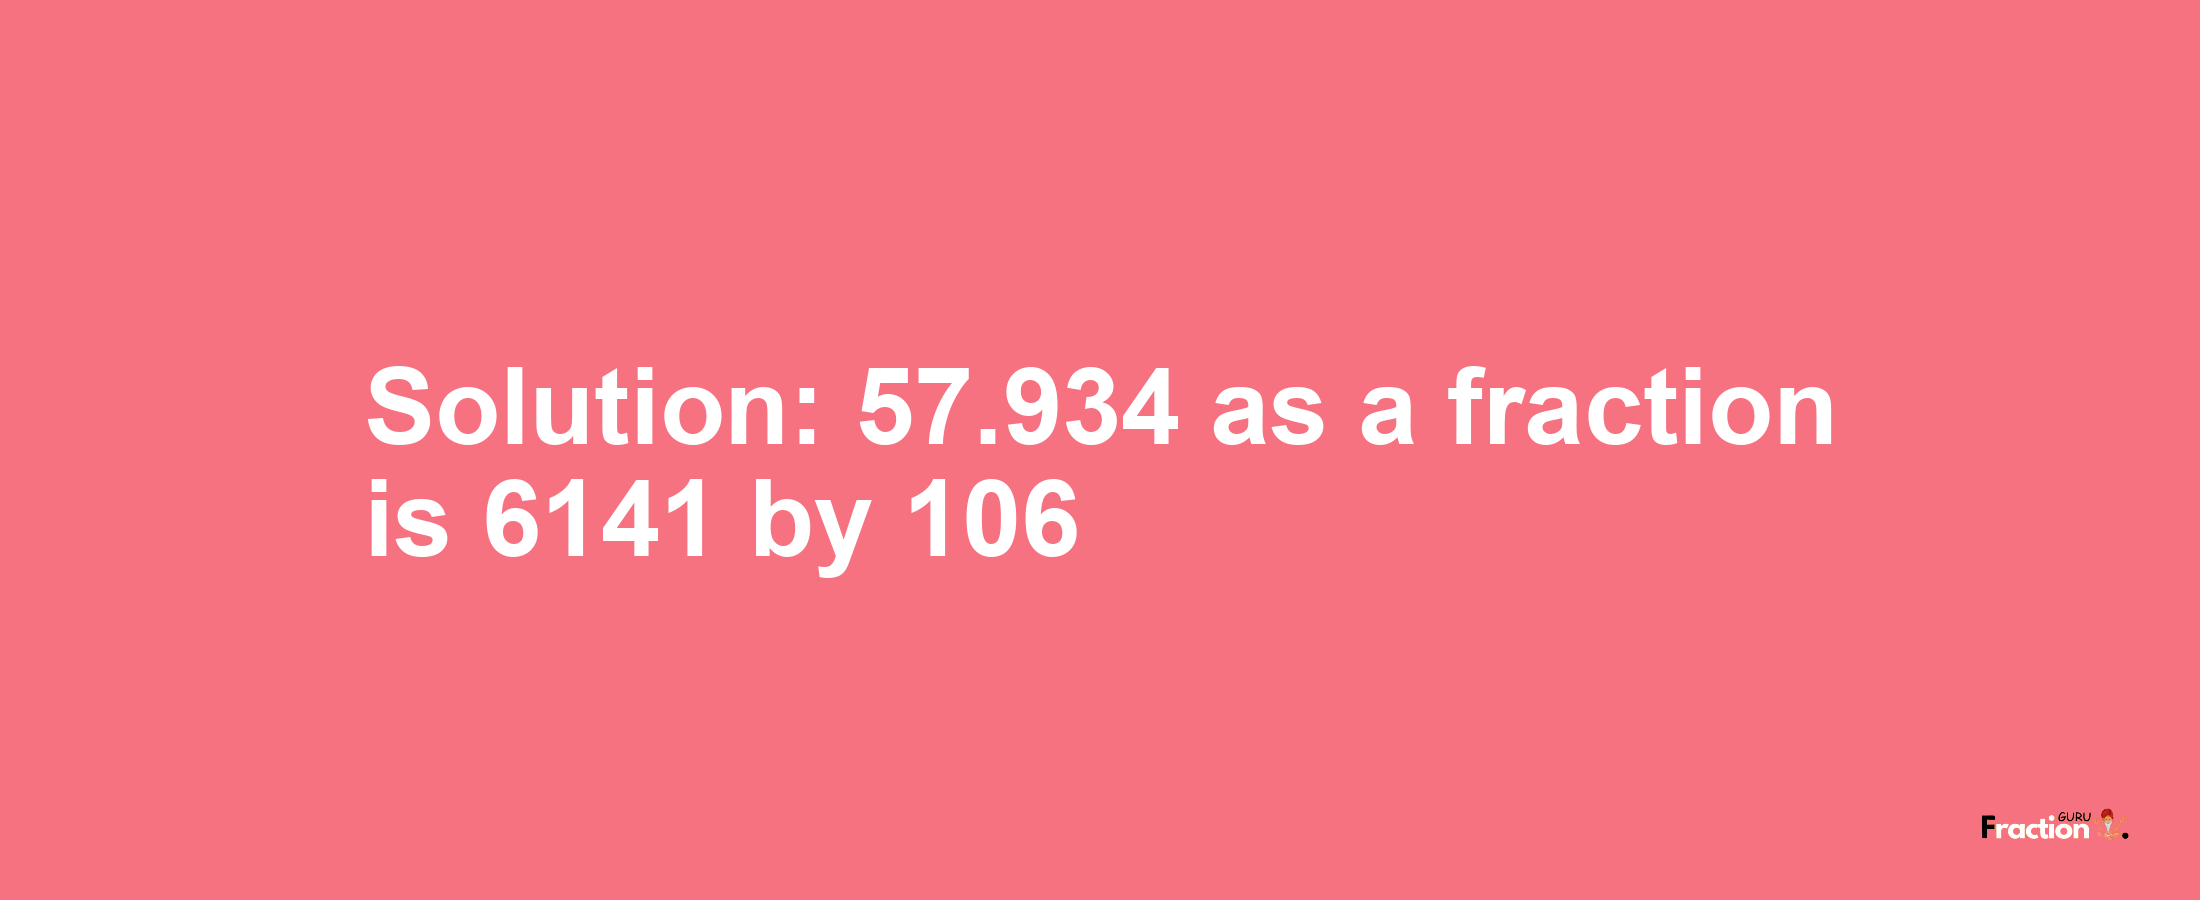 Solution:57.934 as a fraction is 6141/106